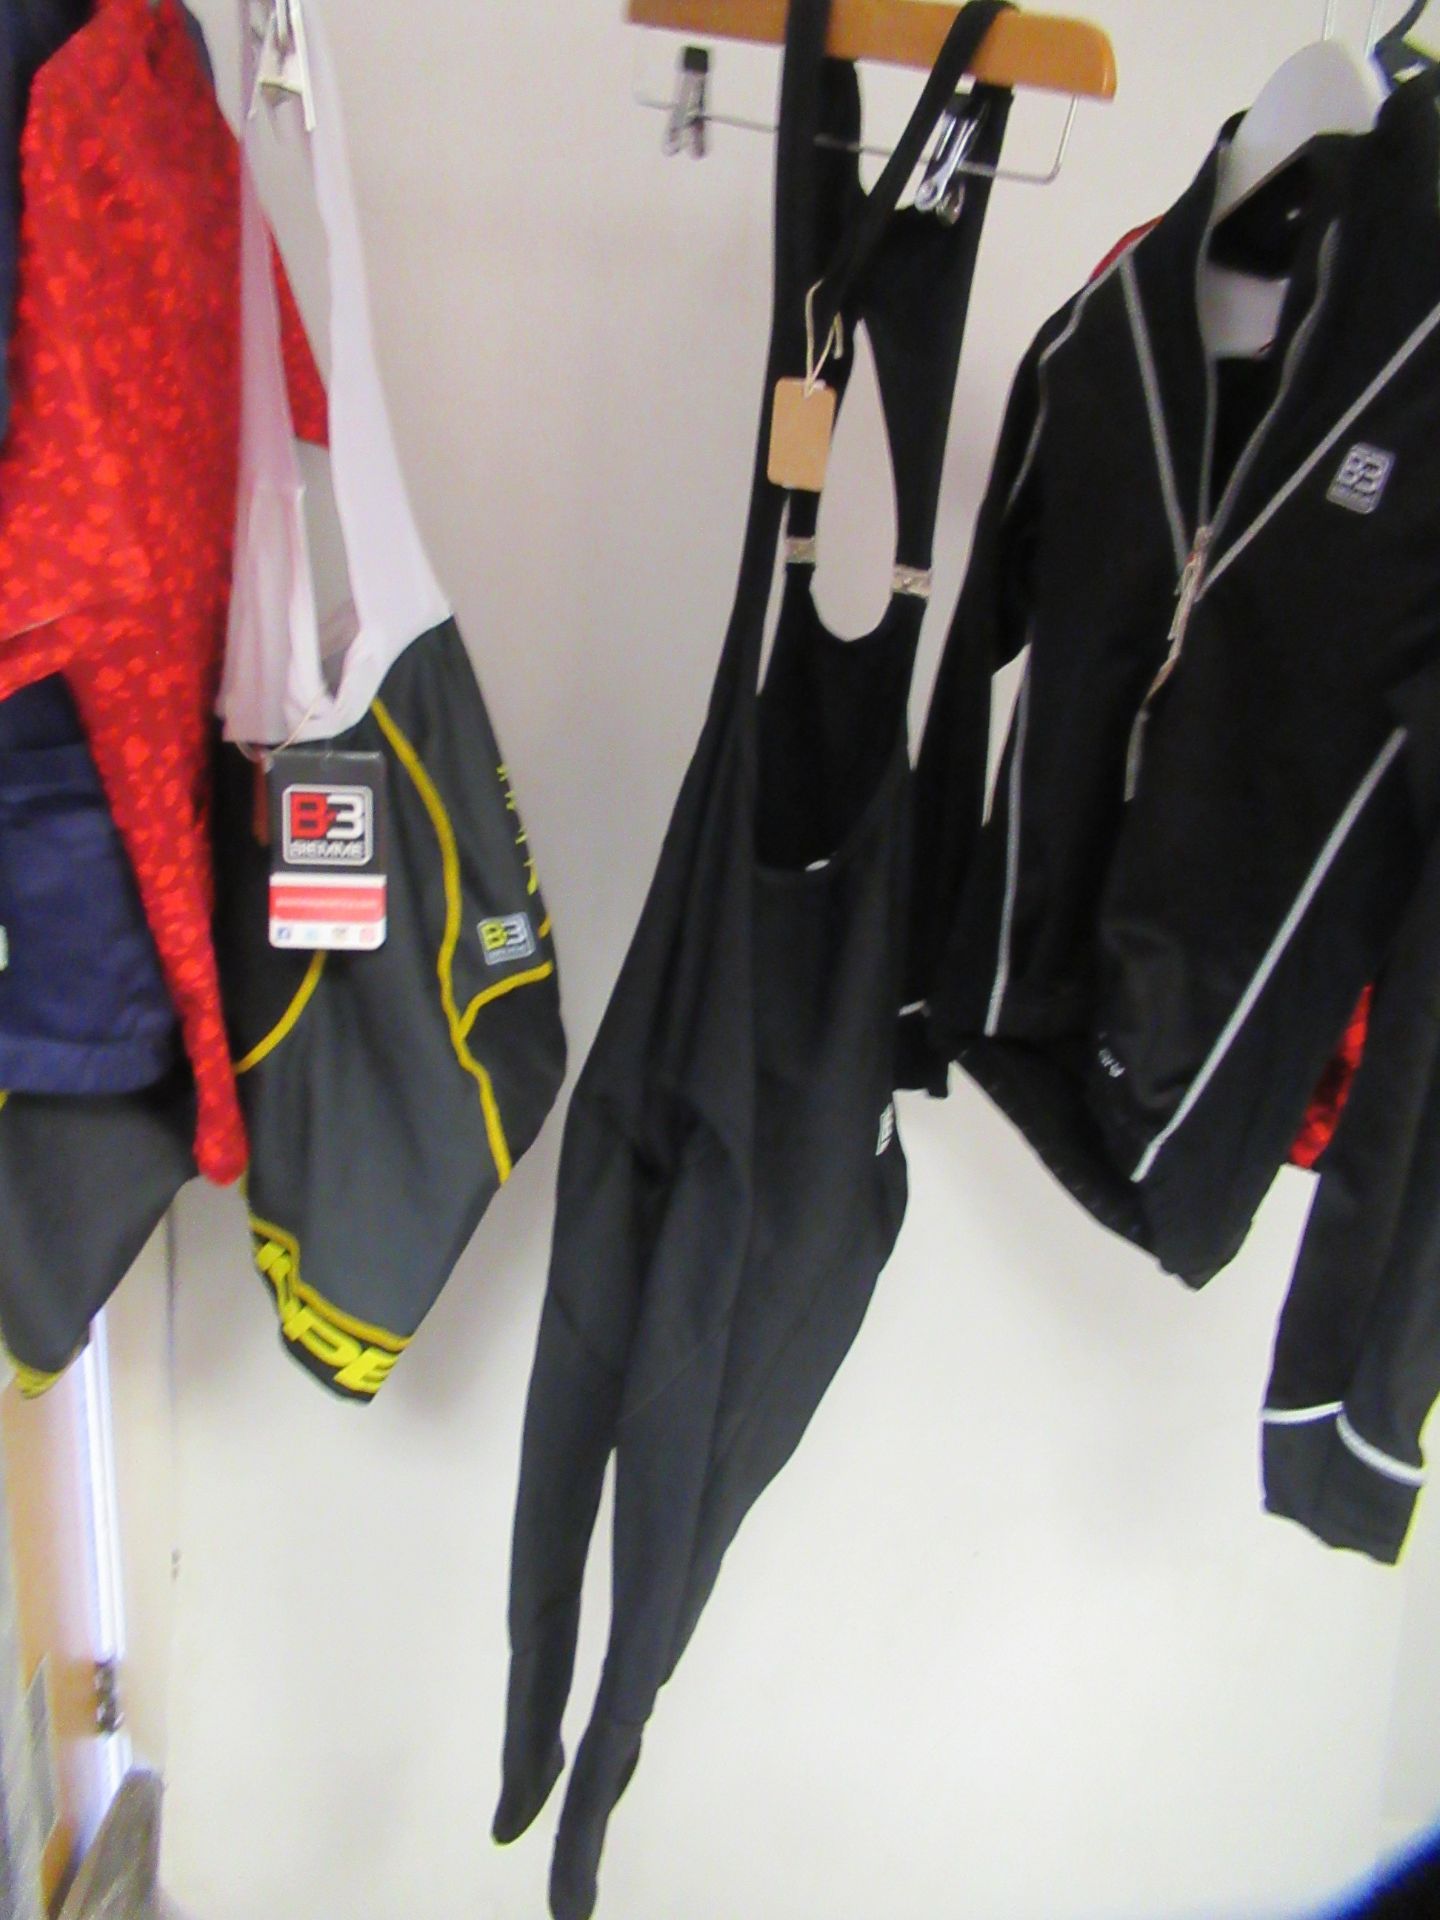 XS/S Womens Cycling Clothes - Image 7 of 10